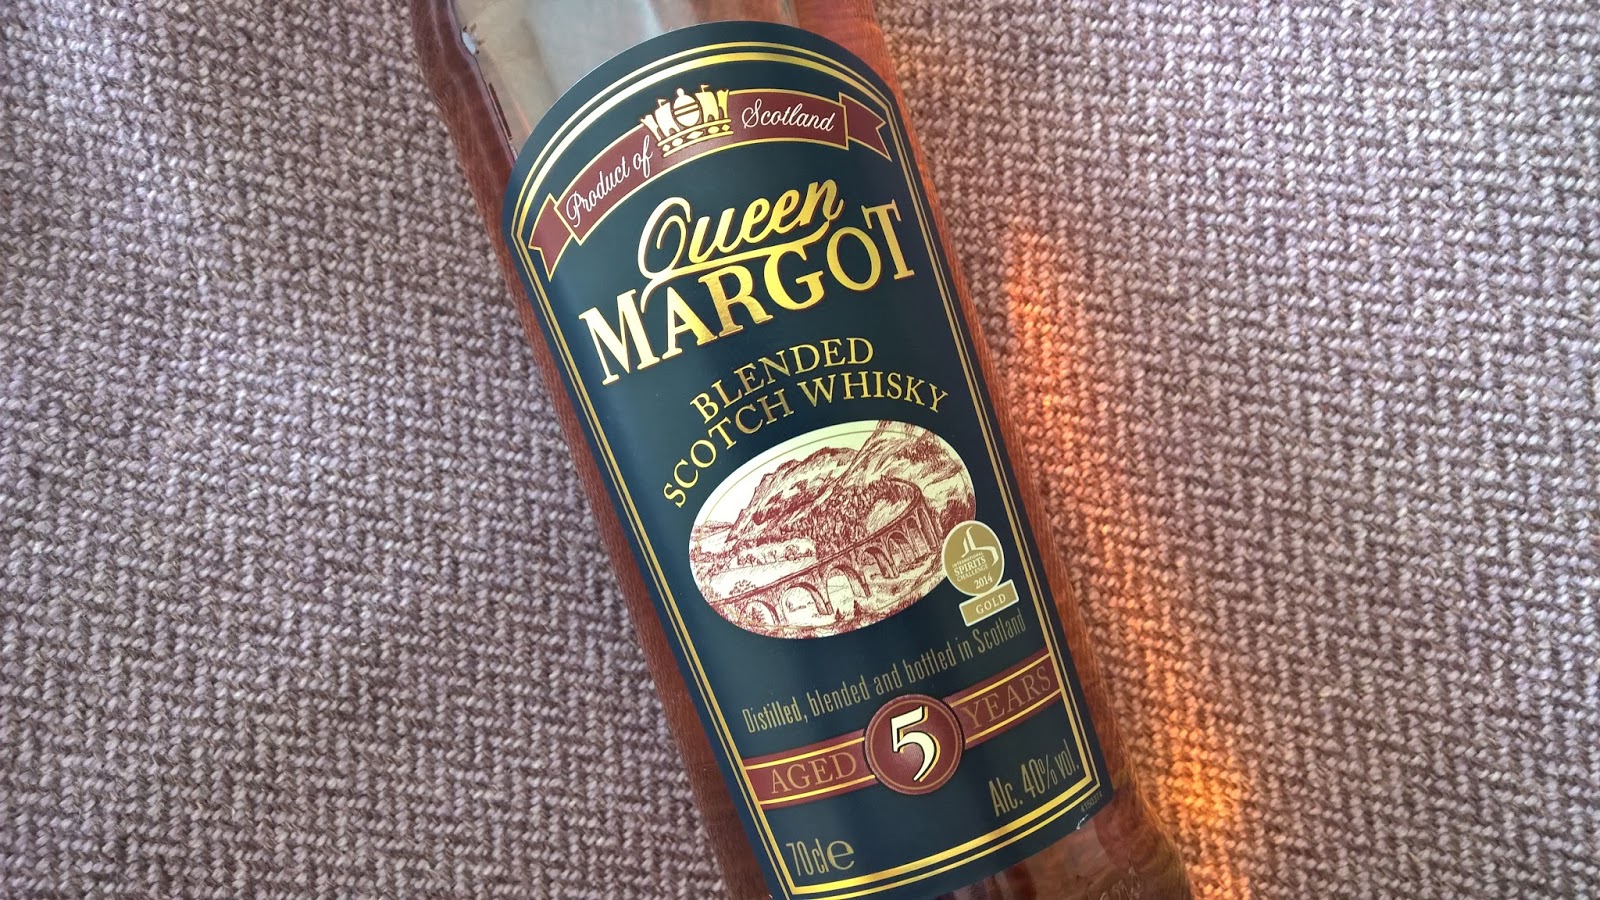 Blended Whisky Queen Scotch Review: Margot